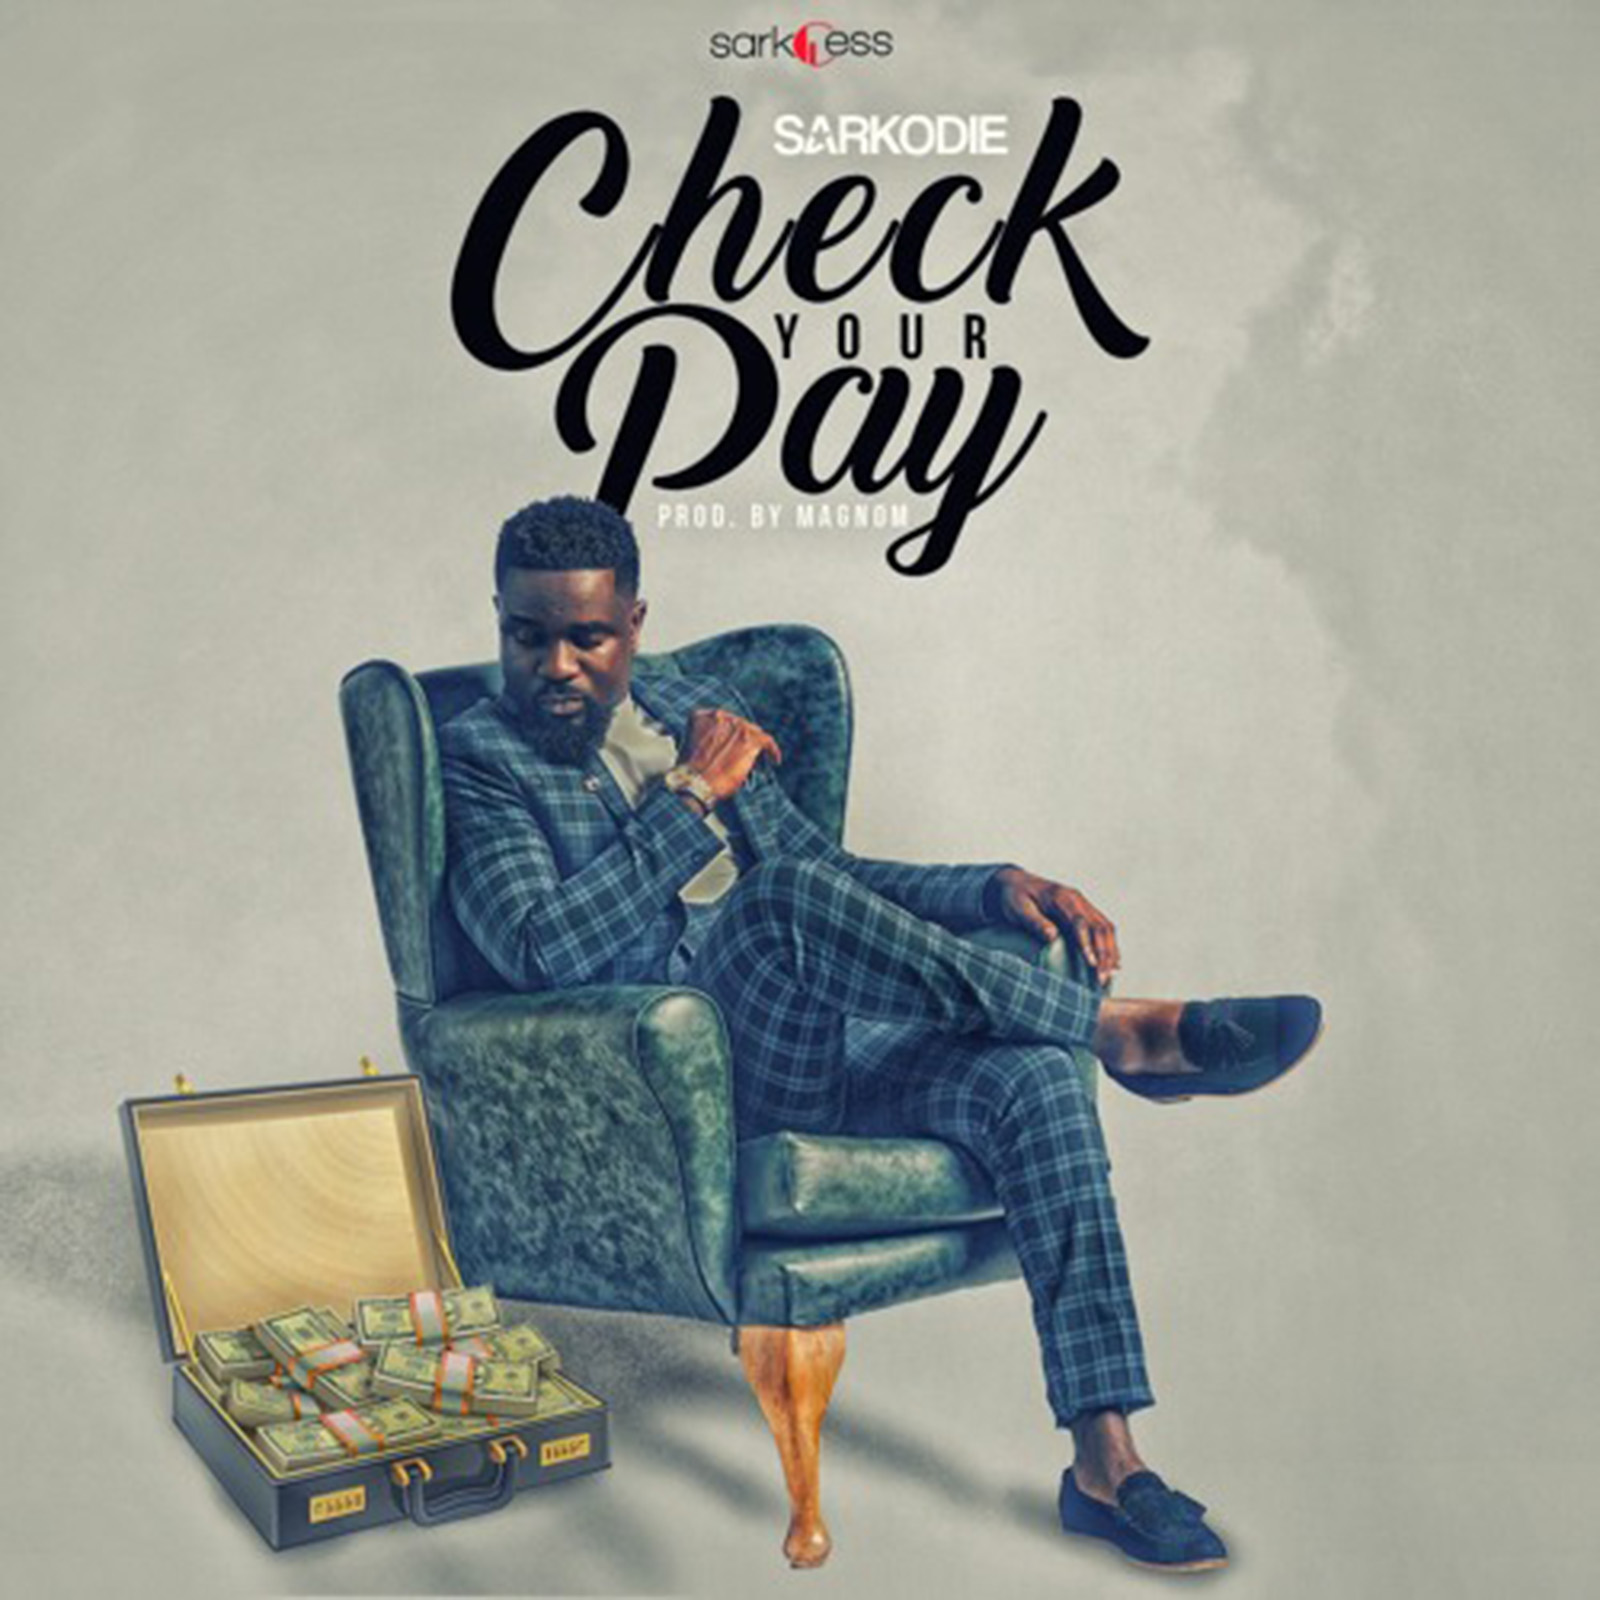 Check Your Pay by Sarkodie